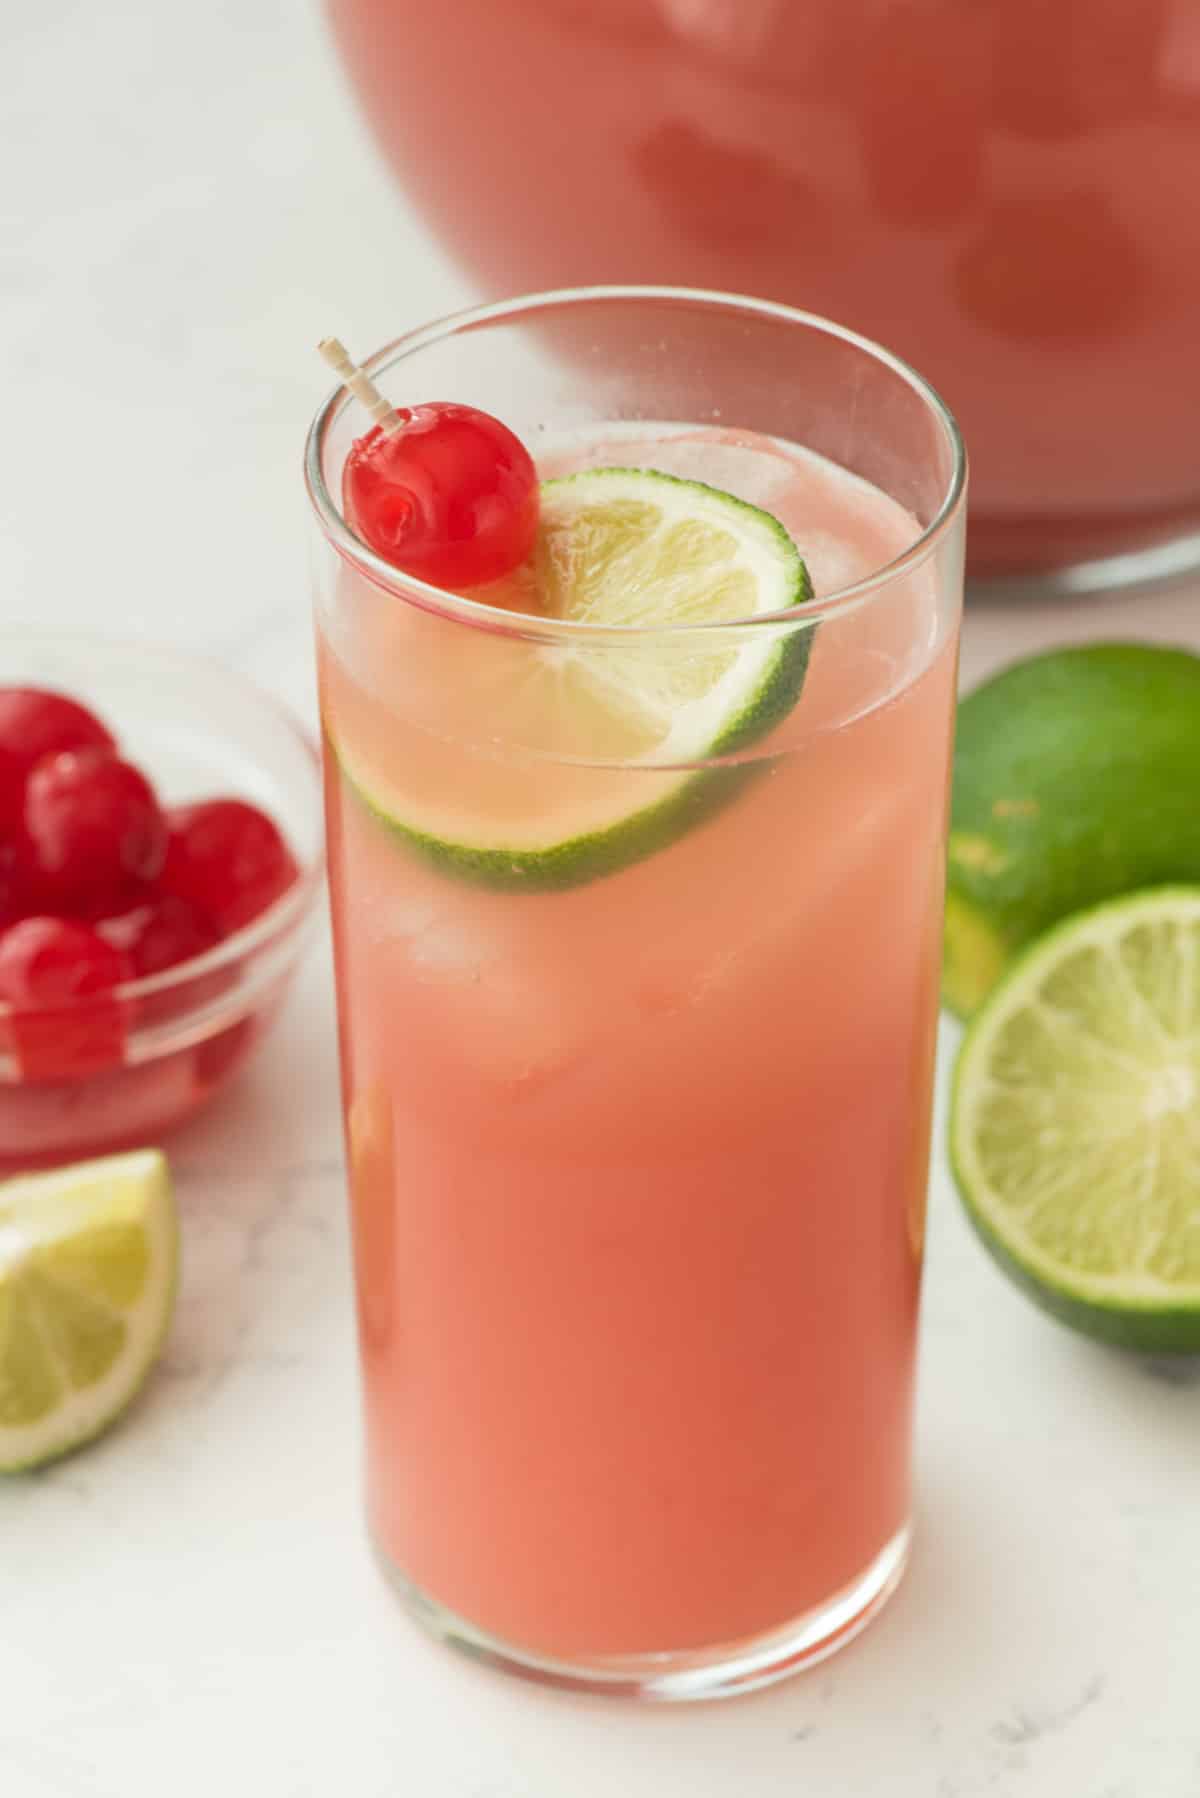 pink drink in a tall clear glass with a lime and a cherry inside.